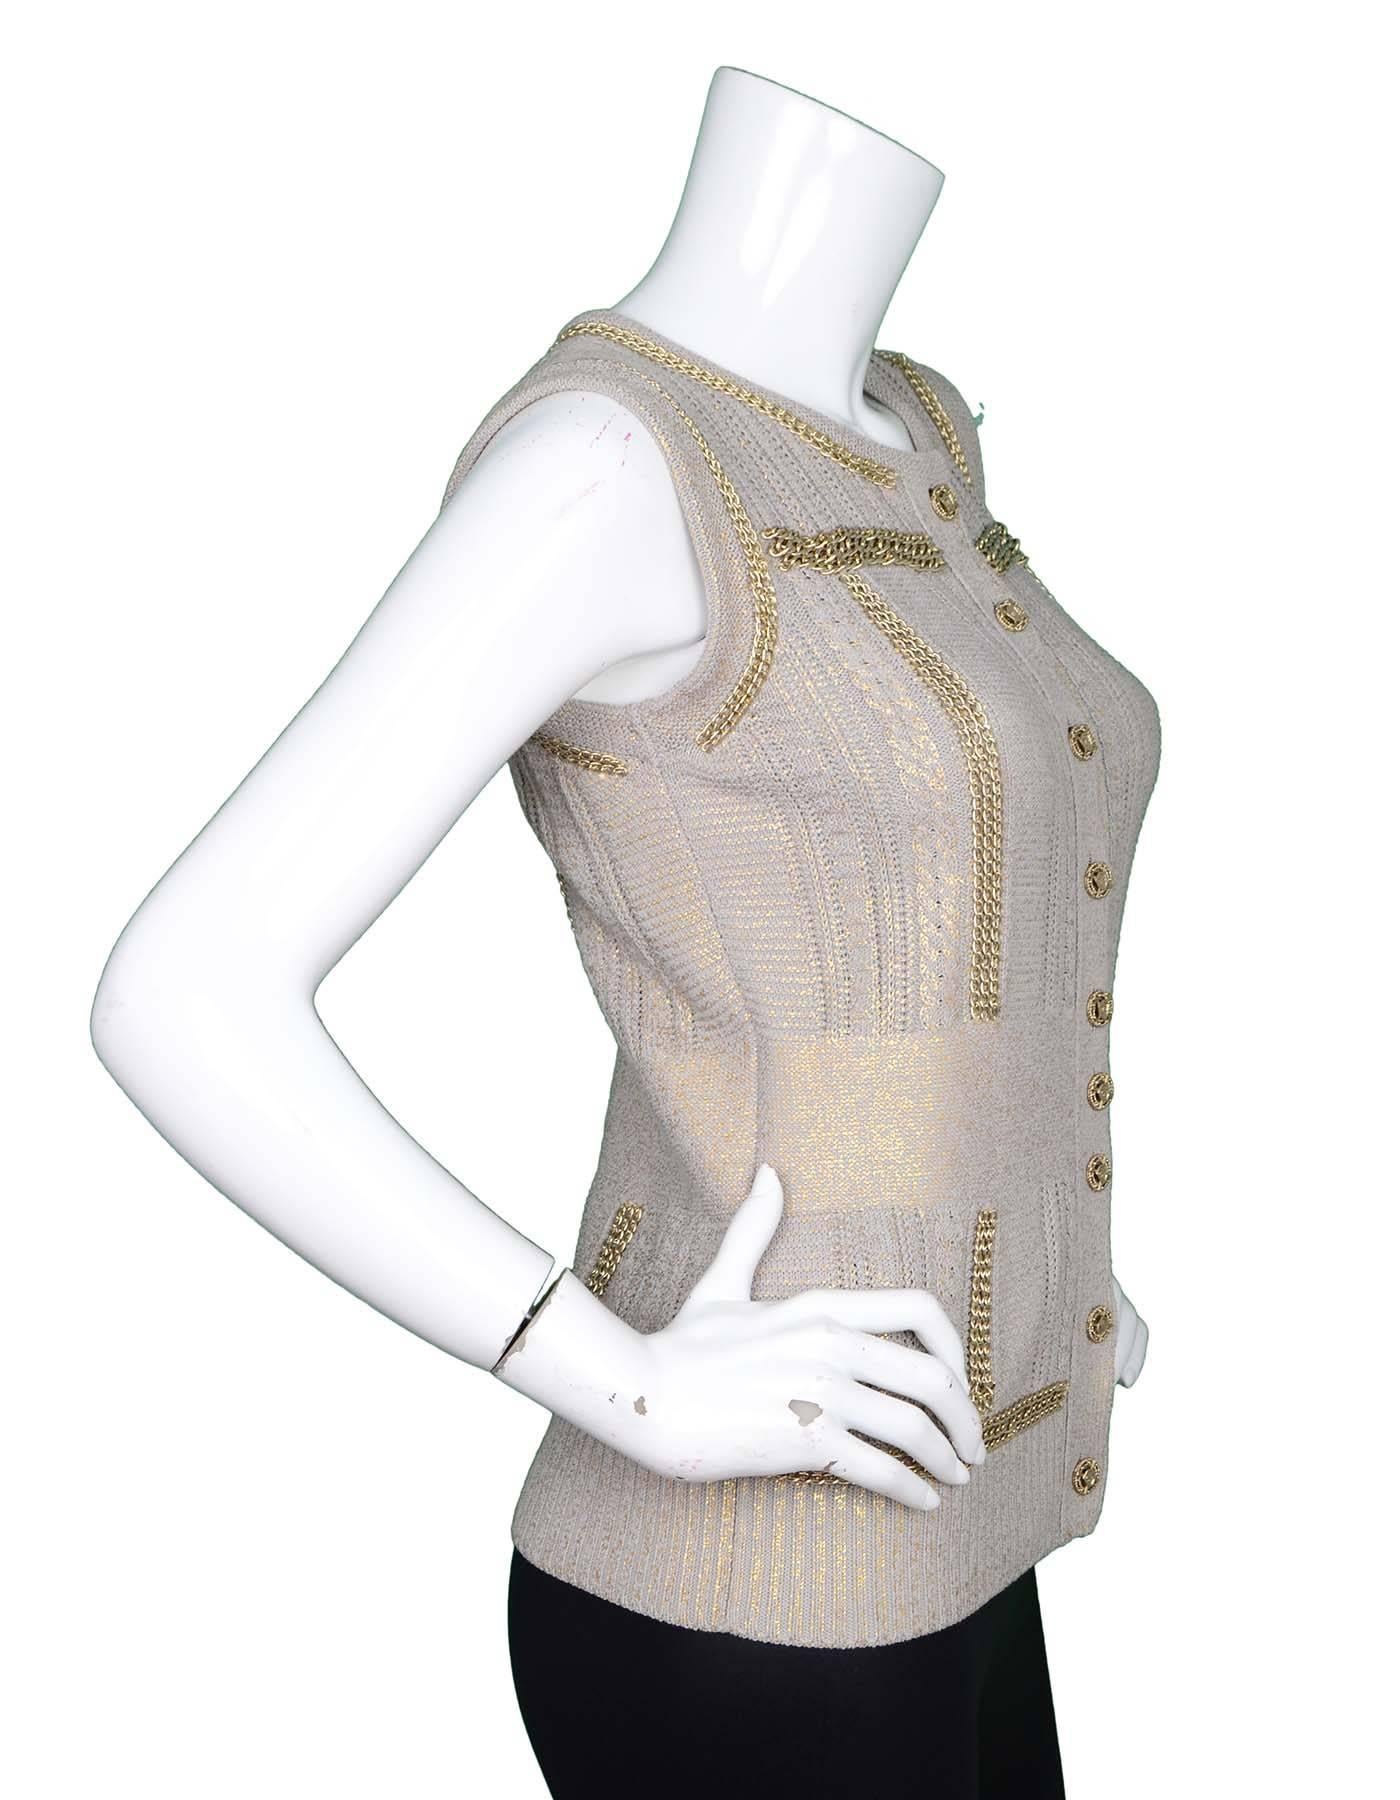 Chanel Taupe and Gold Vest Sz 38
Features goldtone chain link trim and coated gold metallic detail throughout

Made In: Italy
Year Of Production: 2008
Color: Taupe and gold
Composition: 56% Rayon, 44% Cotton
Lining: None
Closure/Opening: